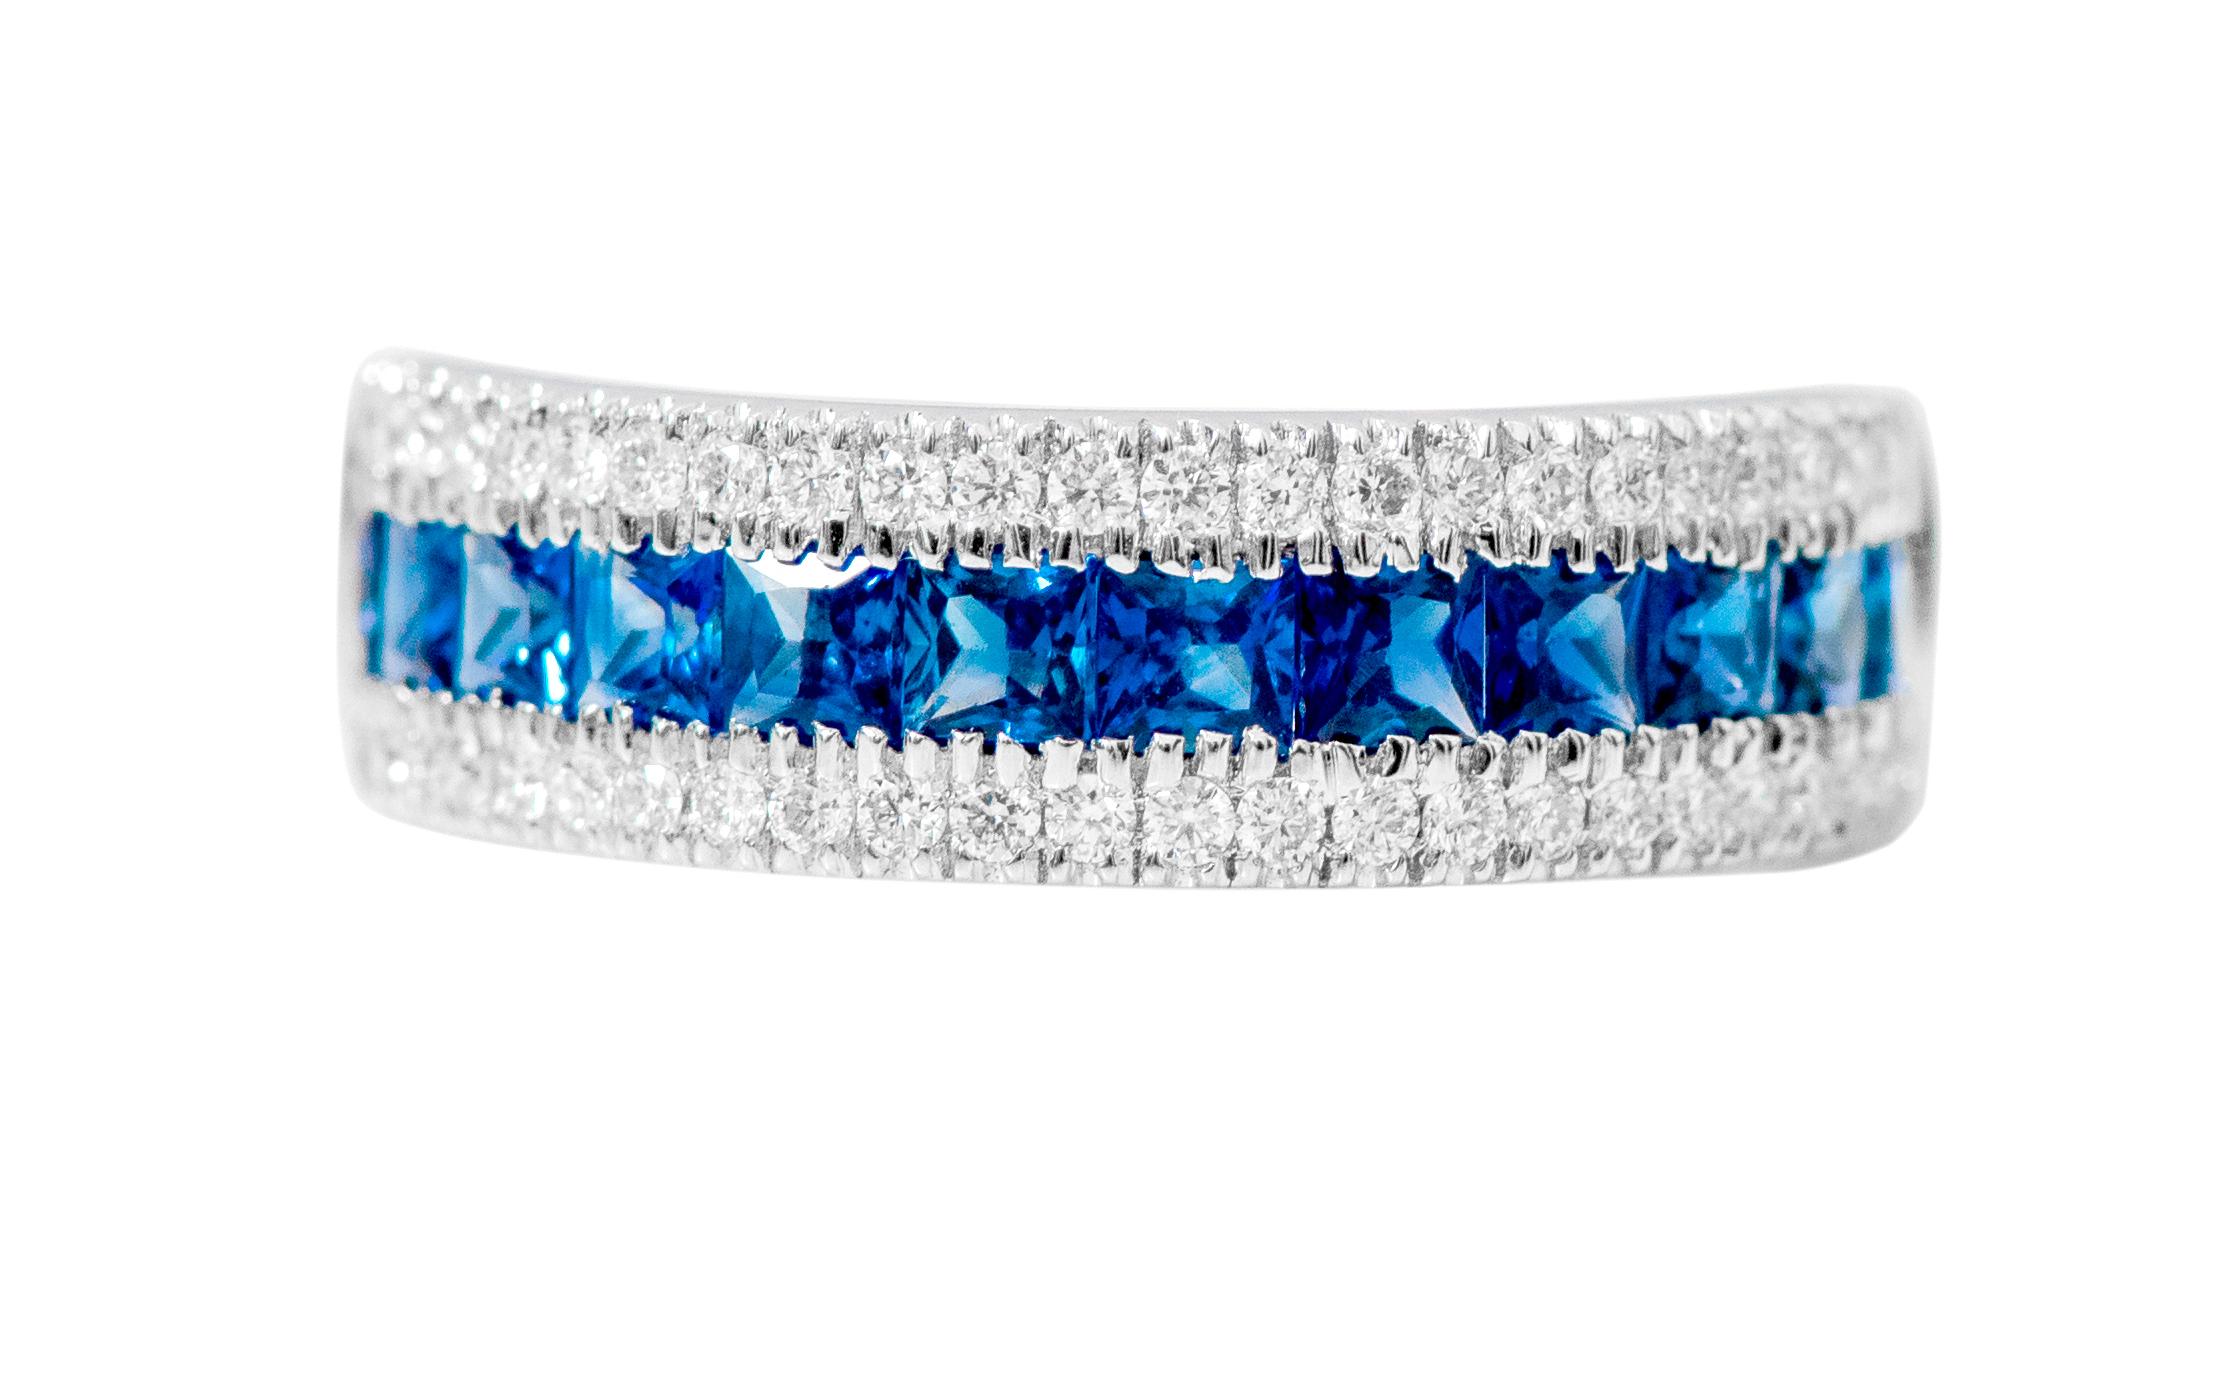 18 Karat White Gold 1.07 Carat Princess-Cut Sapphire and Diamond Eternity Half-Band Ring

This enchanting Egyptian blue sapphire and diamond half-band is distinctive. The perfectly cut and matched princess-cut blue sapphires in closed side-channel